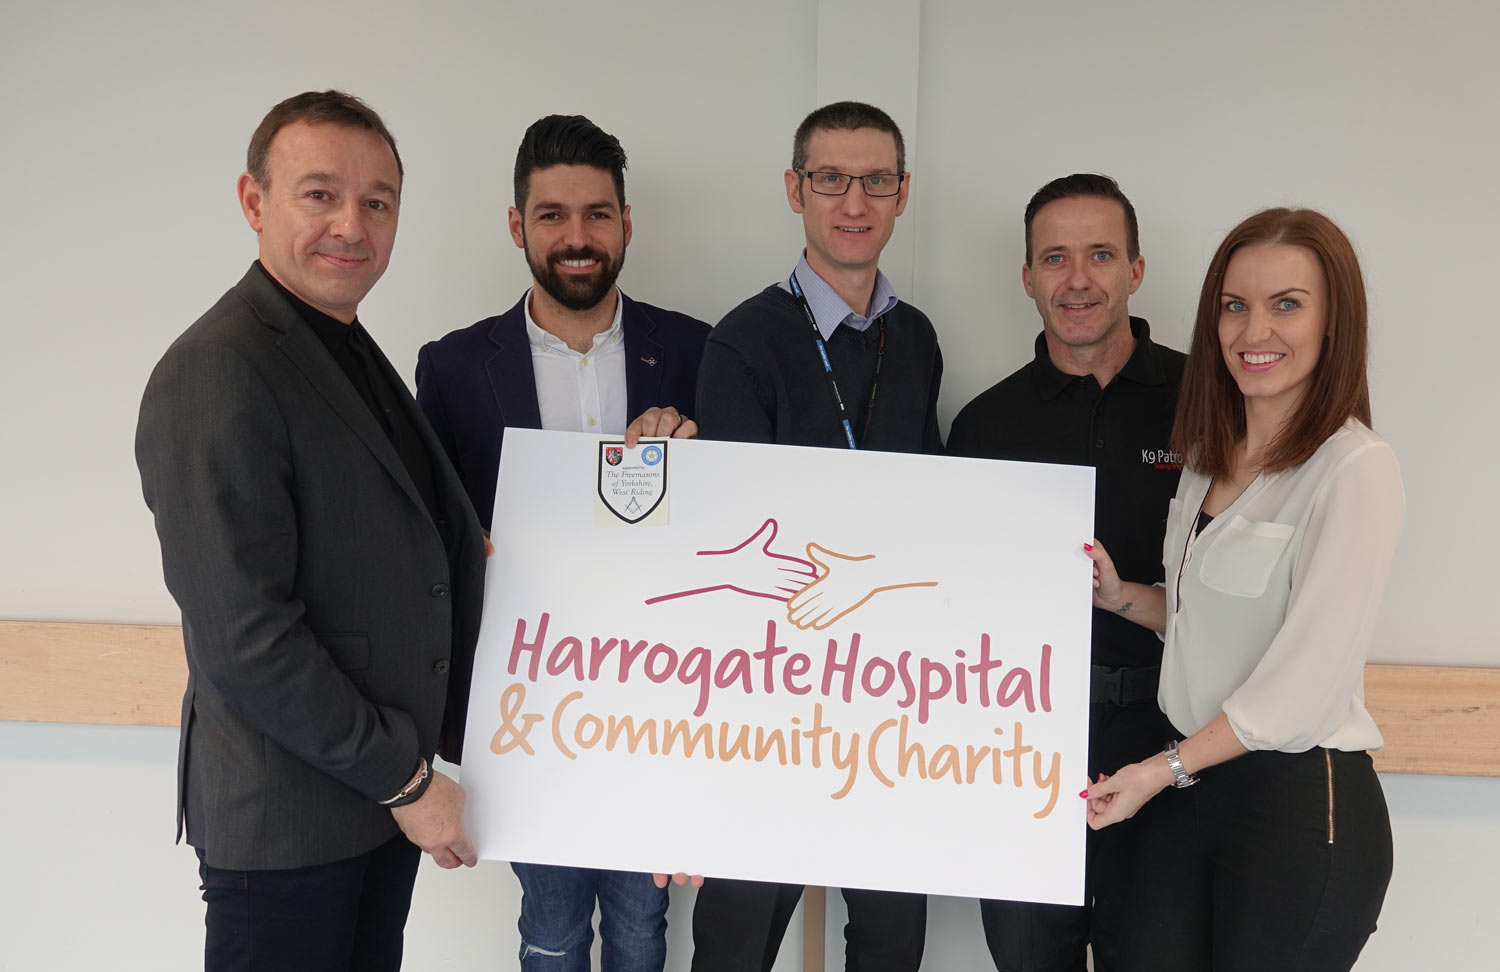 Ward Donation! Pictured from left are: Andrew Simister, Fernando Sarmento De Alencar, David Fisher, Lee Chandler and Kate Chandler